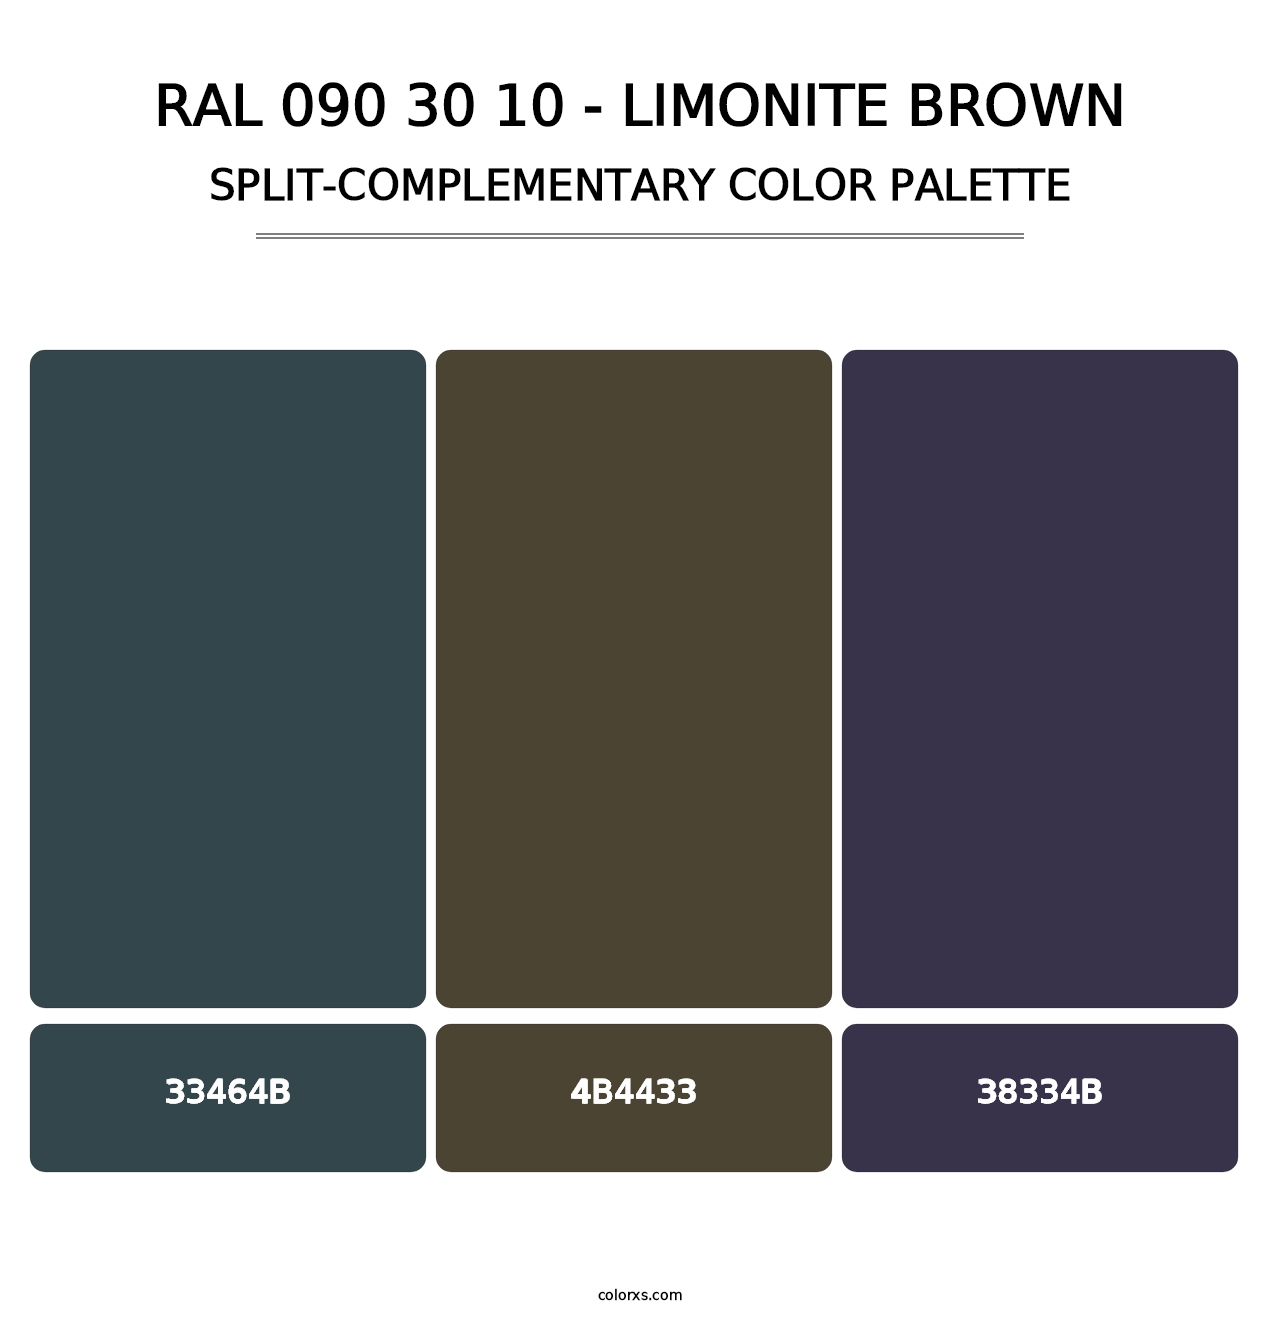 RAL 090 30 10 - Limonite Brown - Split-Complementary Color Palette